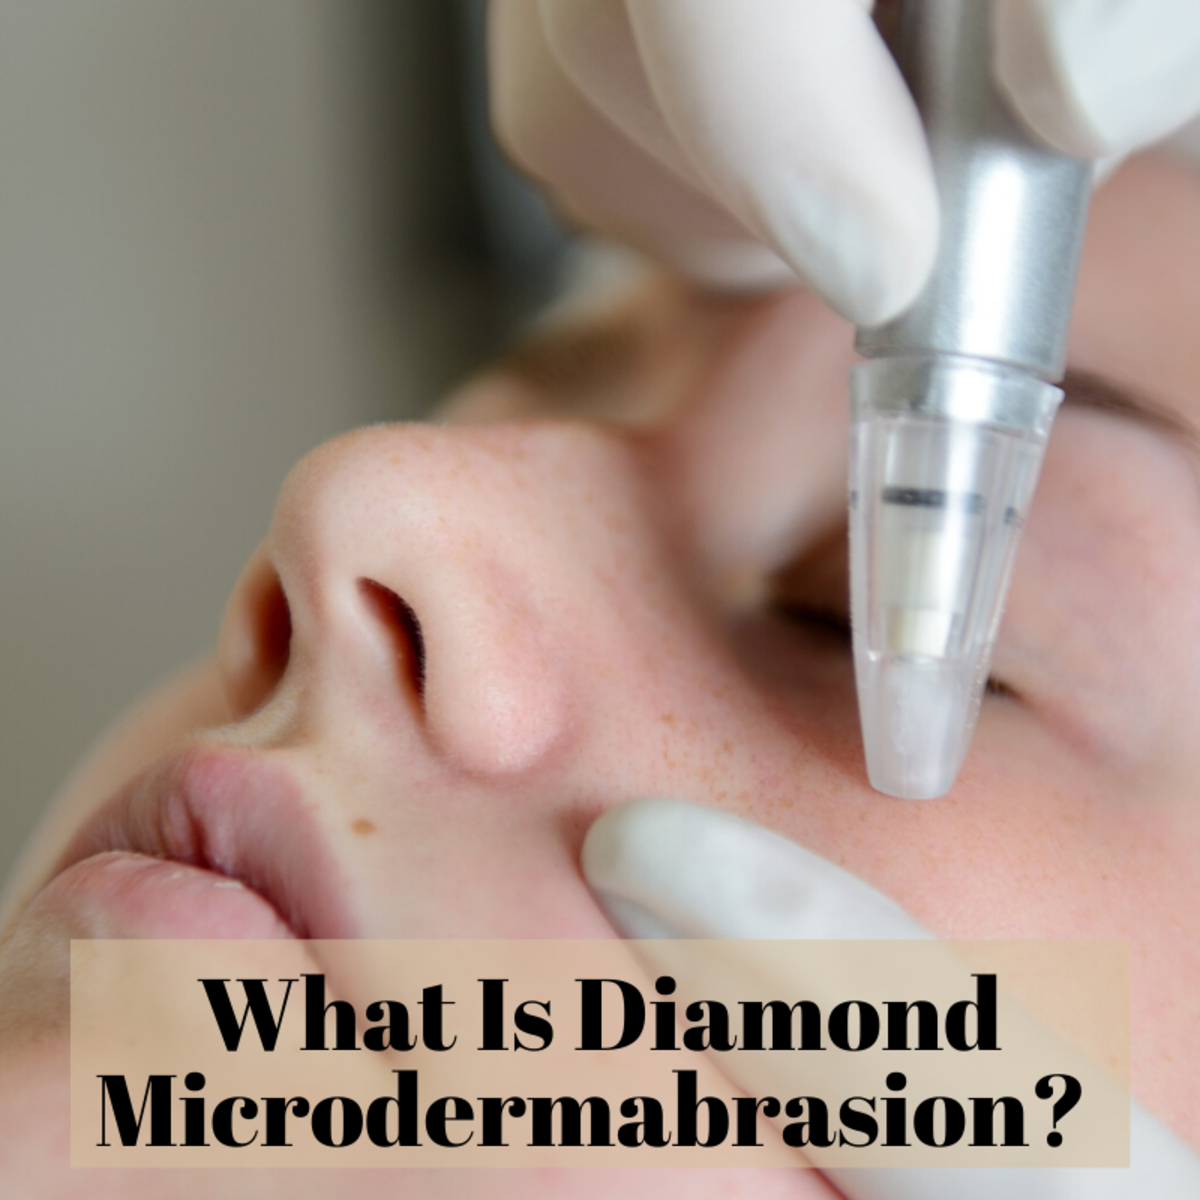 The Benefits of Diamond Microdermabrasion